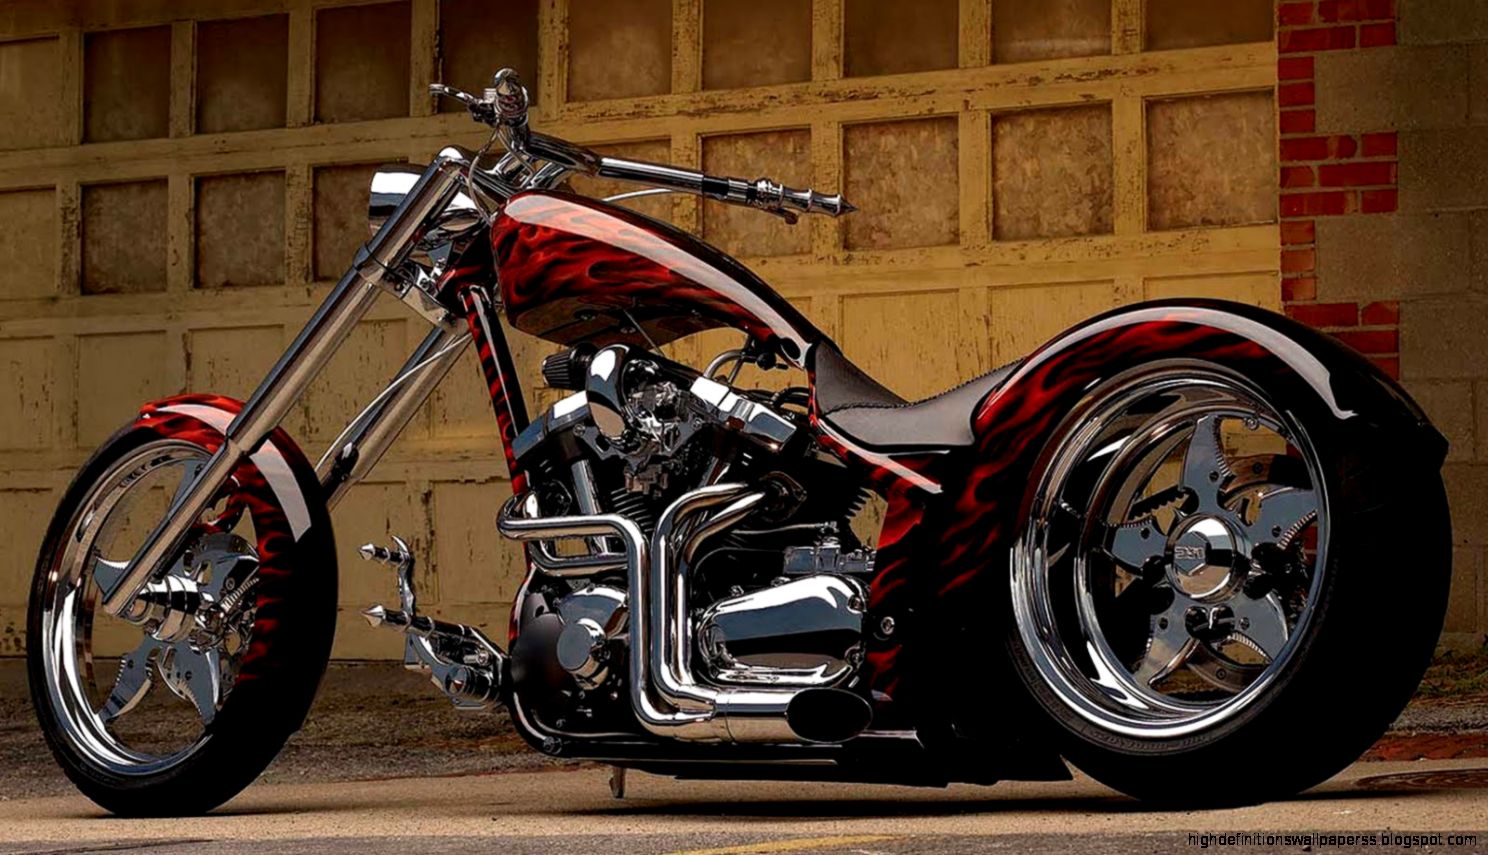 Motorcycle Cool Chopper Fire Hd Image 4189 Wallpaper - Motorcycle - HD Wallpaper 